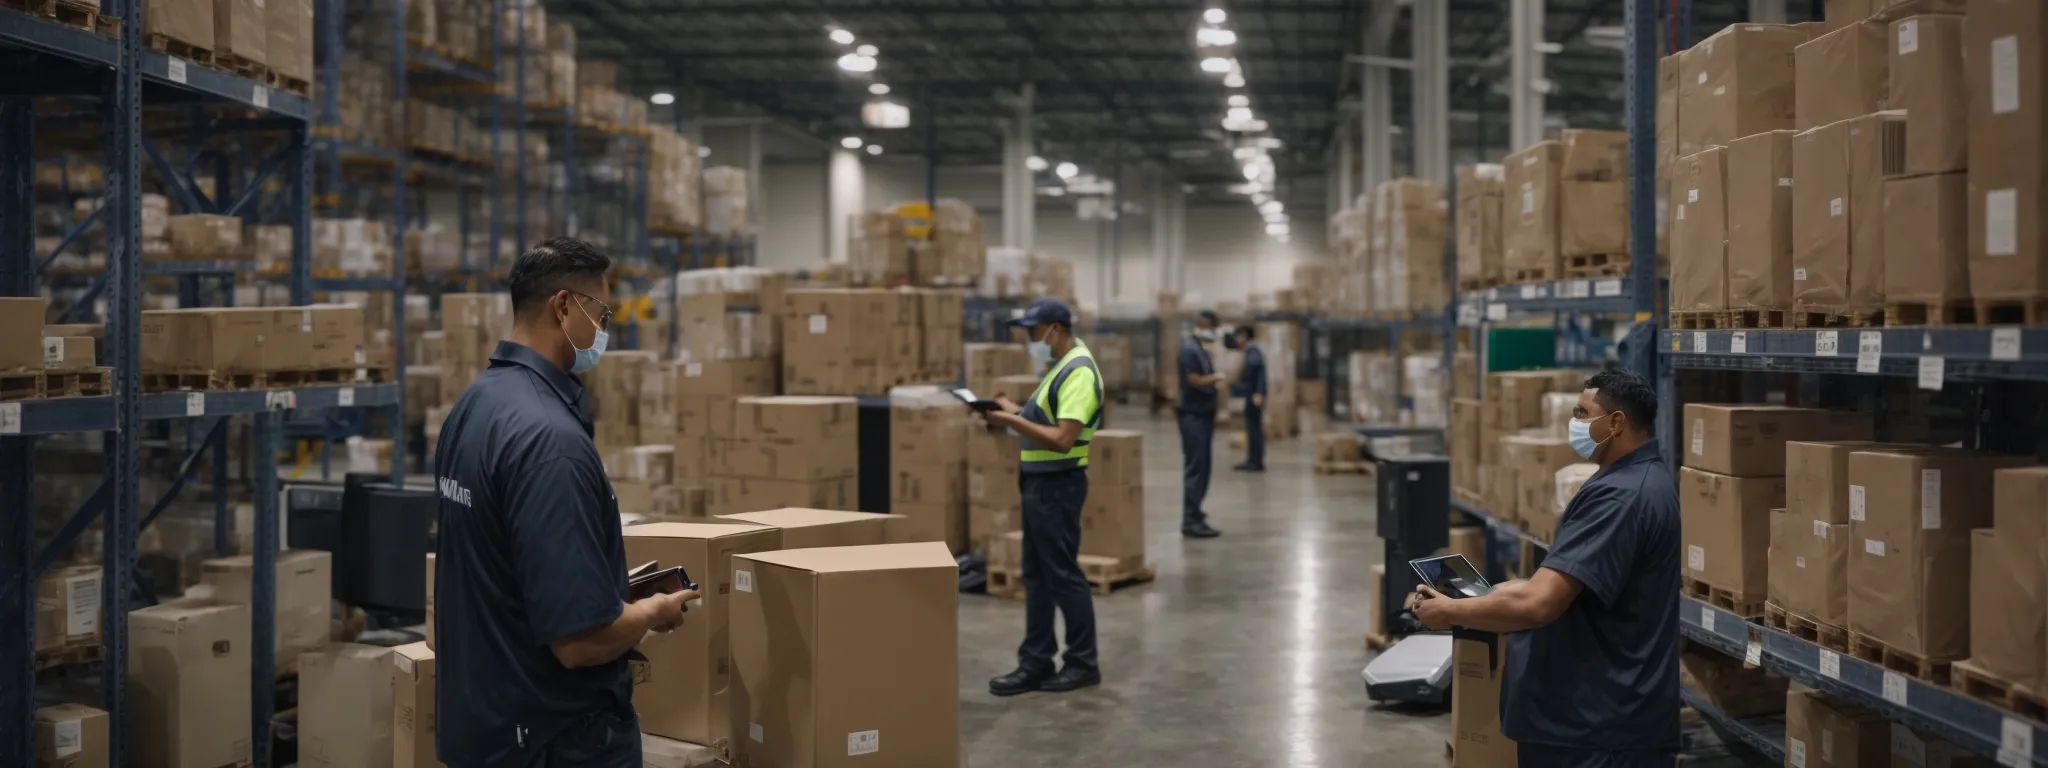 a warehouse manager oversees a bustling distribution center where workers equipped with handheld devices scan barcodes on boxes, seamlessly updating inventory levels in real-time.